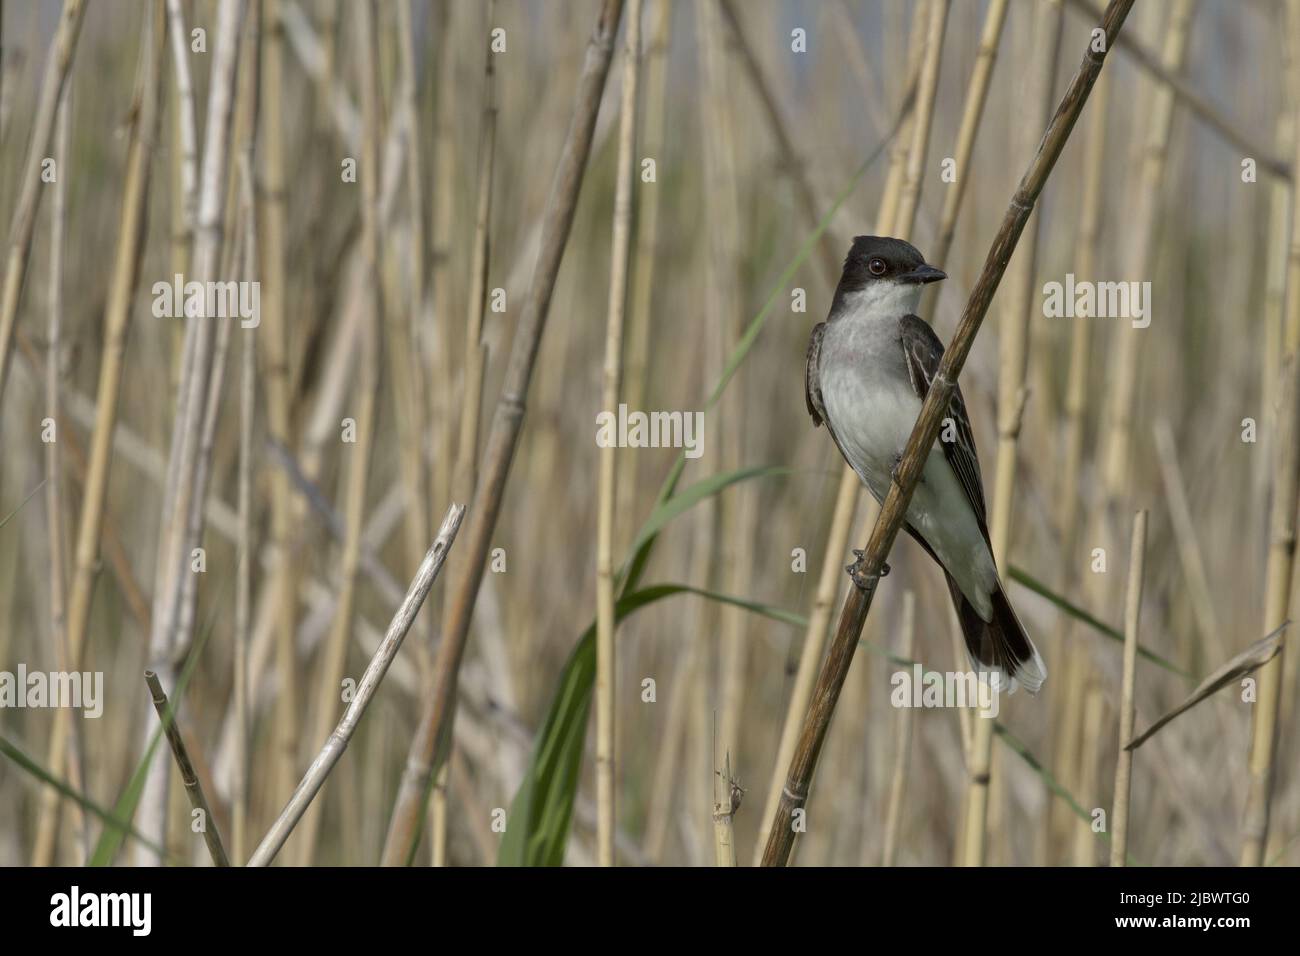 Eastern Kingbird perched on wild stalks background in Sabine Wetlands, Texas, United States is elegant nature Stock Photo